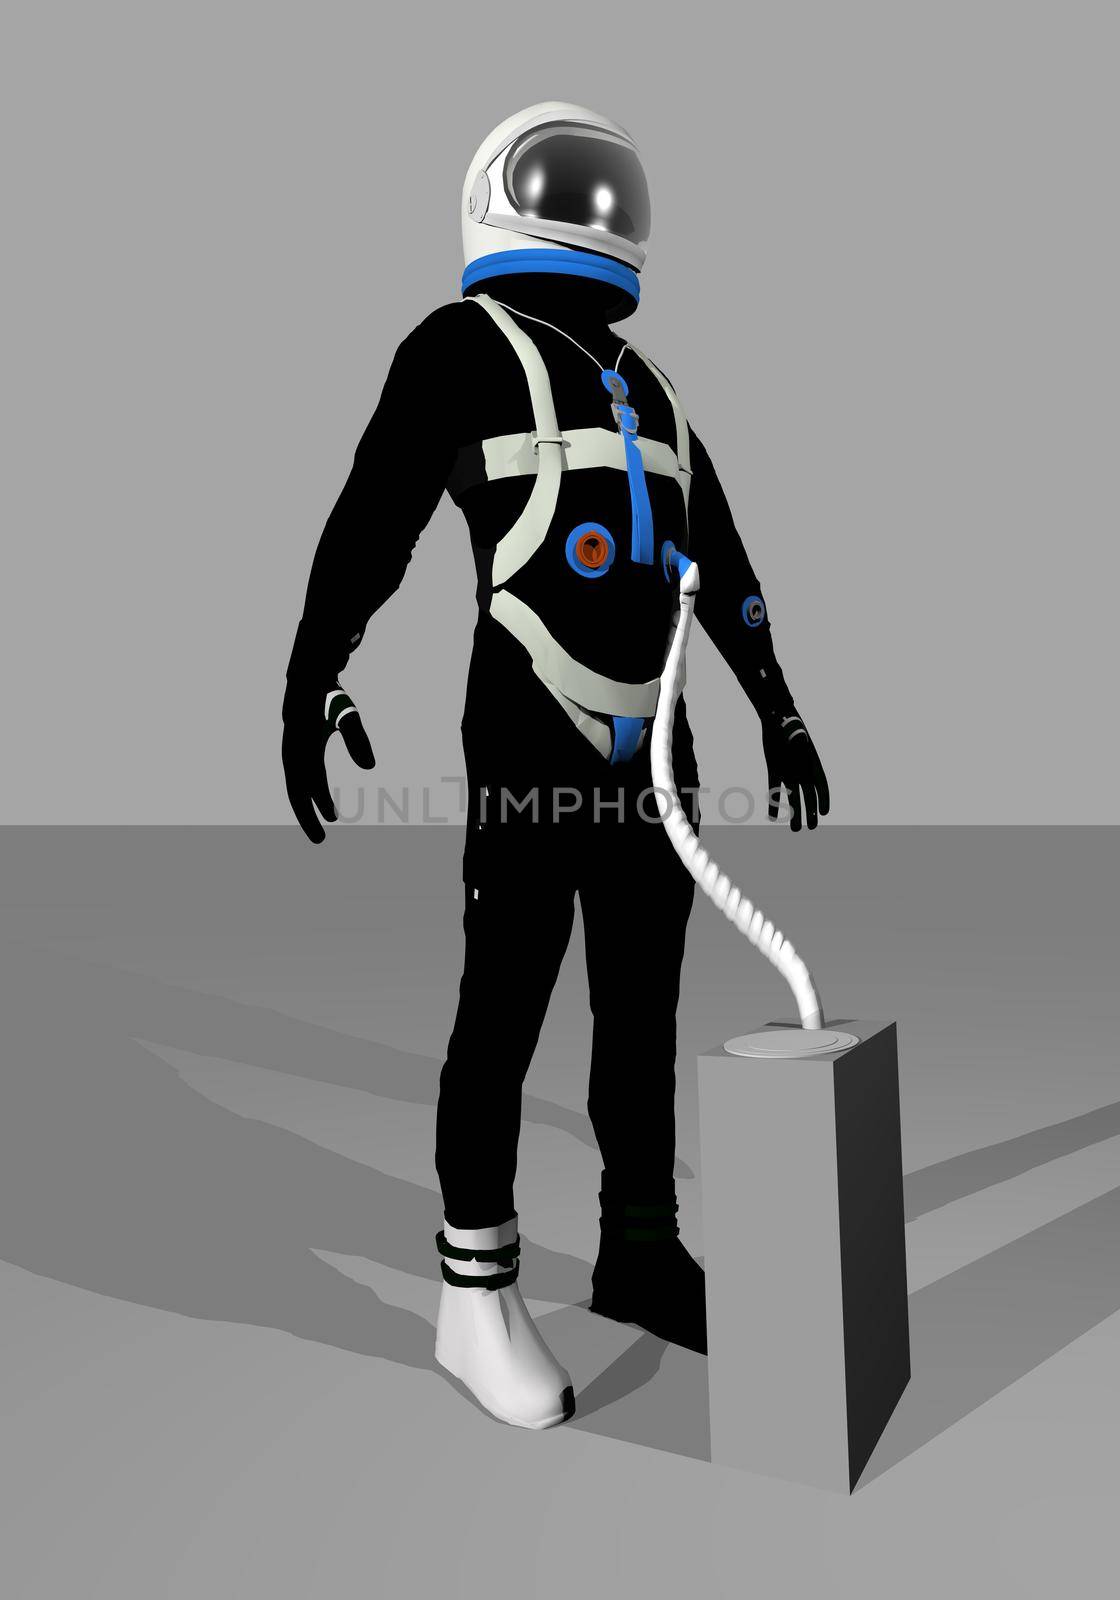 Black gemini space suit standing in grey background - Elements of this image furnished by NASA